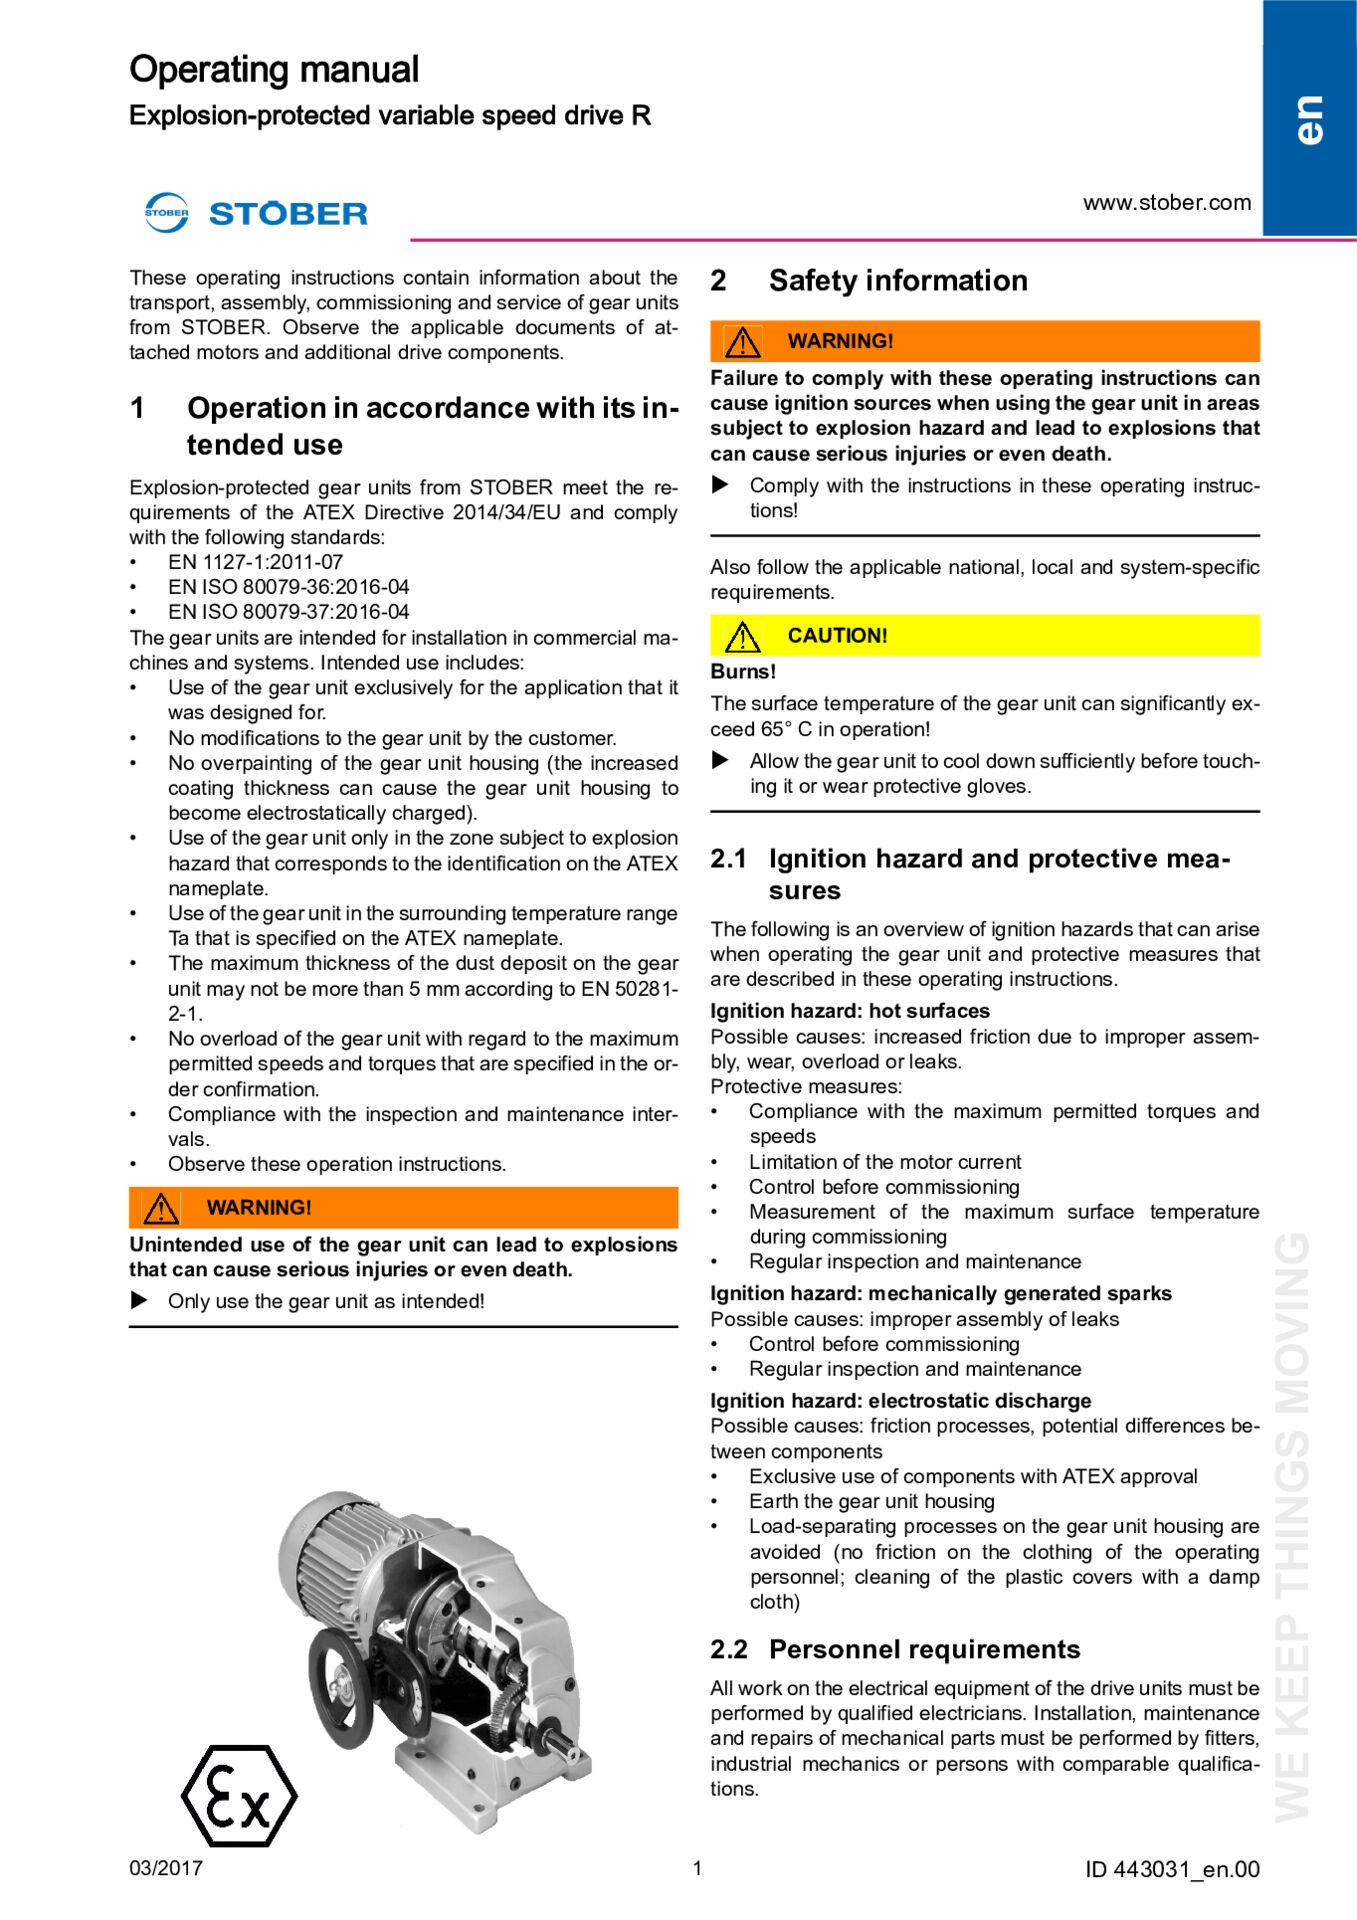 Operating instructions Explosion-protected (ATEX) variable speed drive RD11